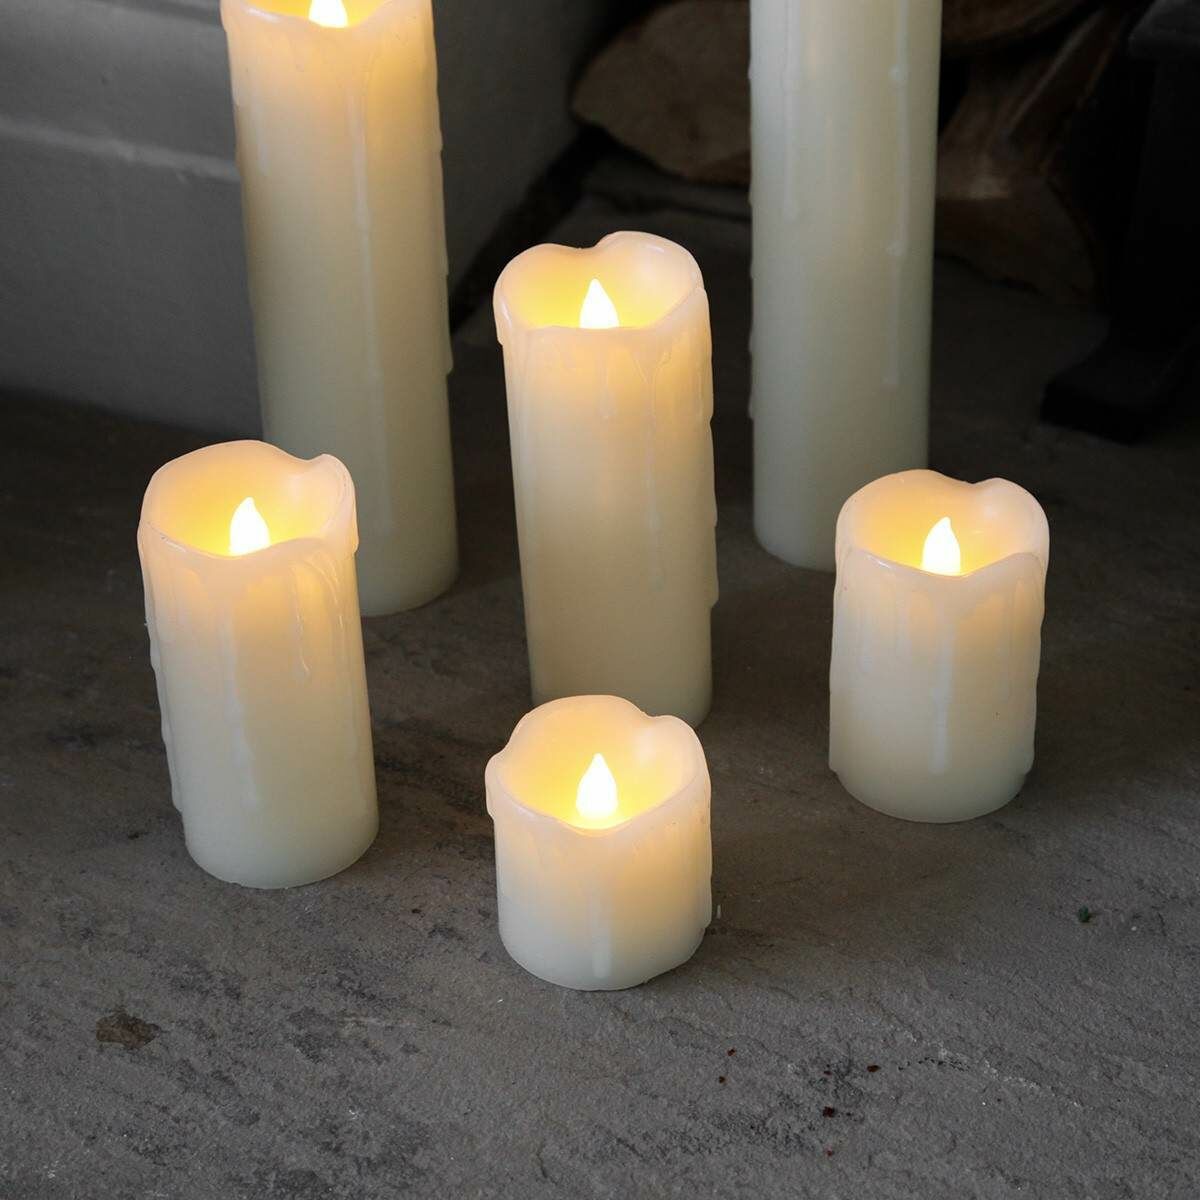 6 Battery Flickering Dripping Wax Pillar LED Candles image 7